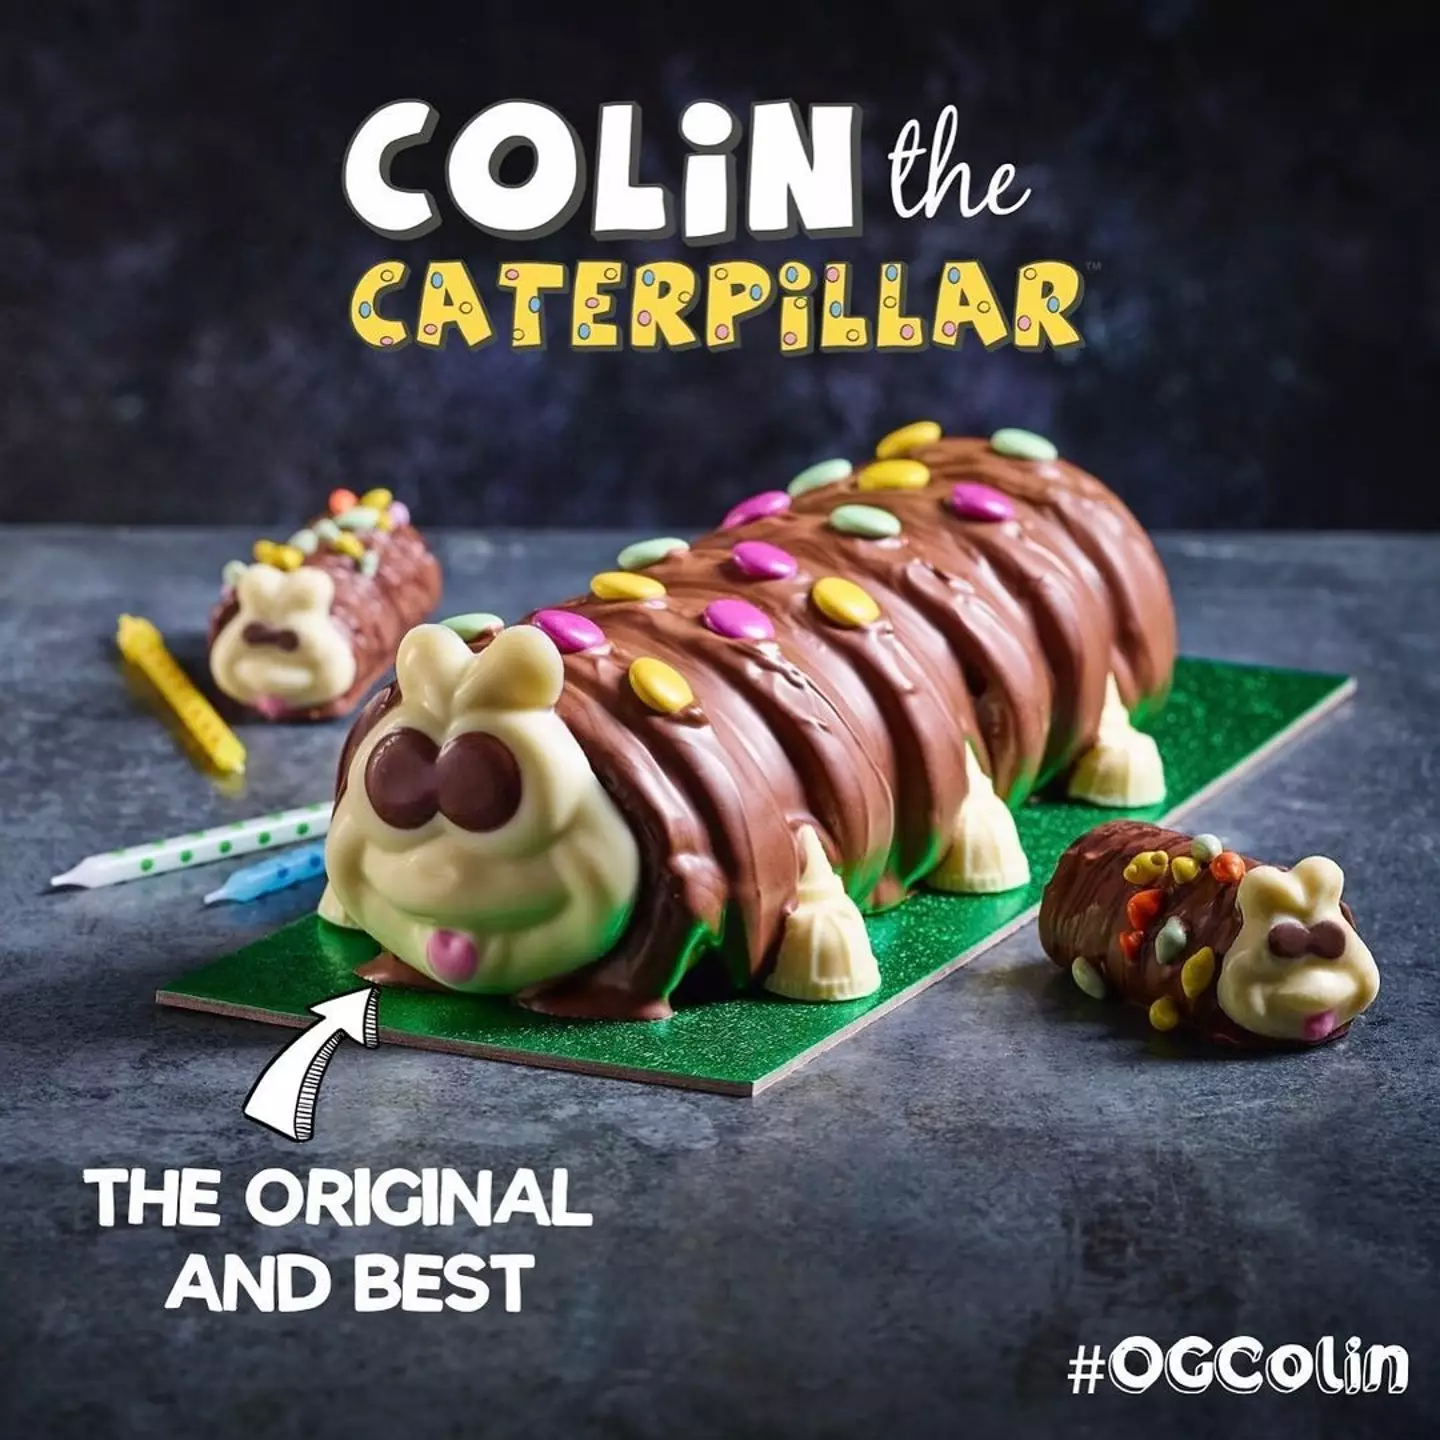 Who could forget caterpillar cake-gate? (